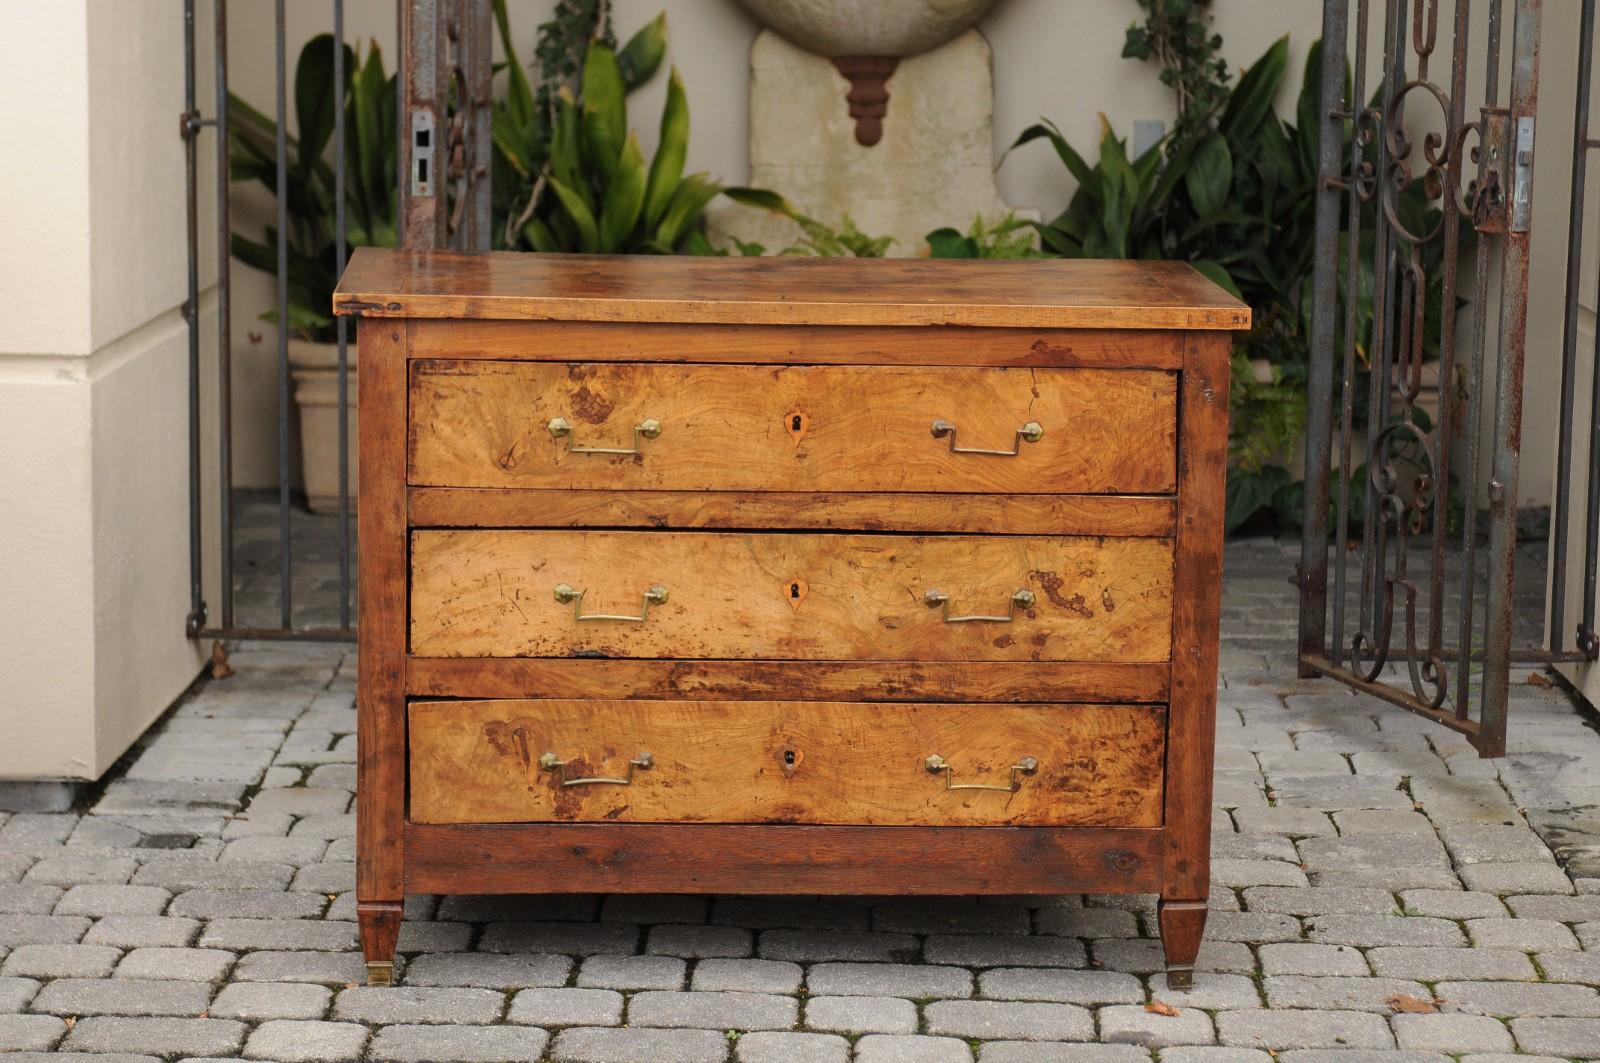 A French neoclassical style burl elm wood commode from the second quarter of the 19th century, with three drawers and short tapered feet. Born under the reign of the last King of France Louis-Philippe, this French commode features a rectangular